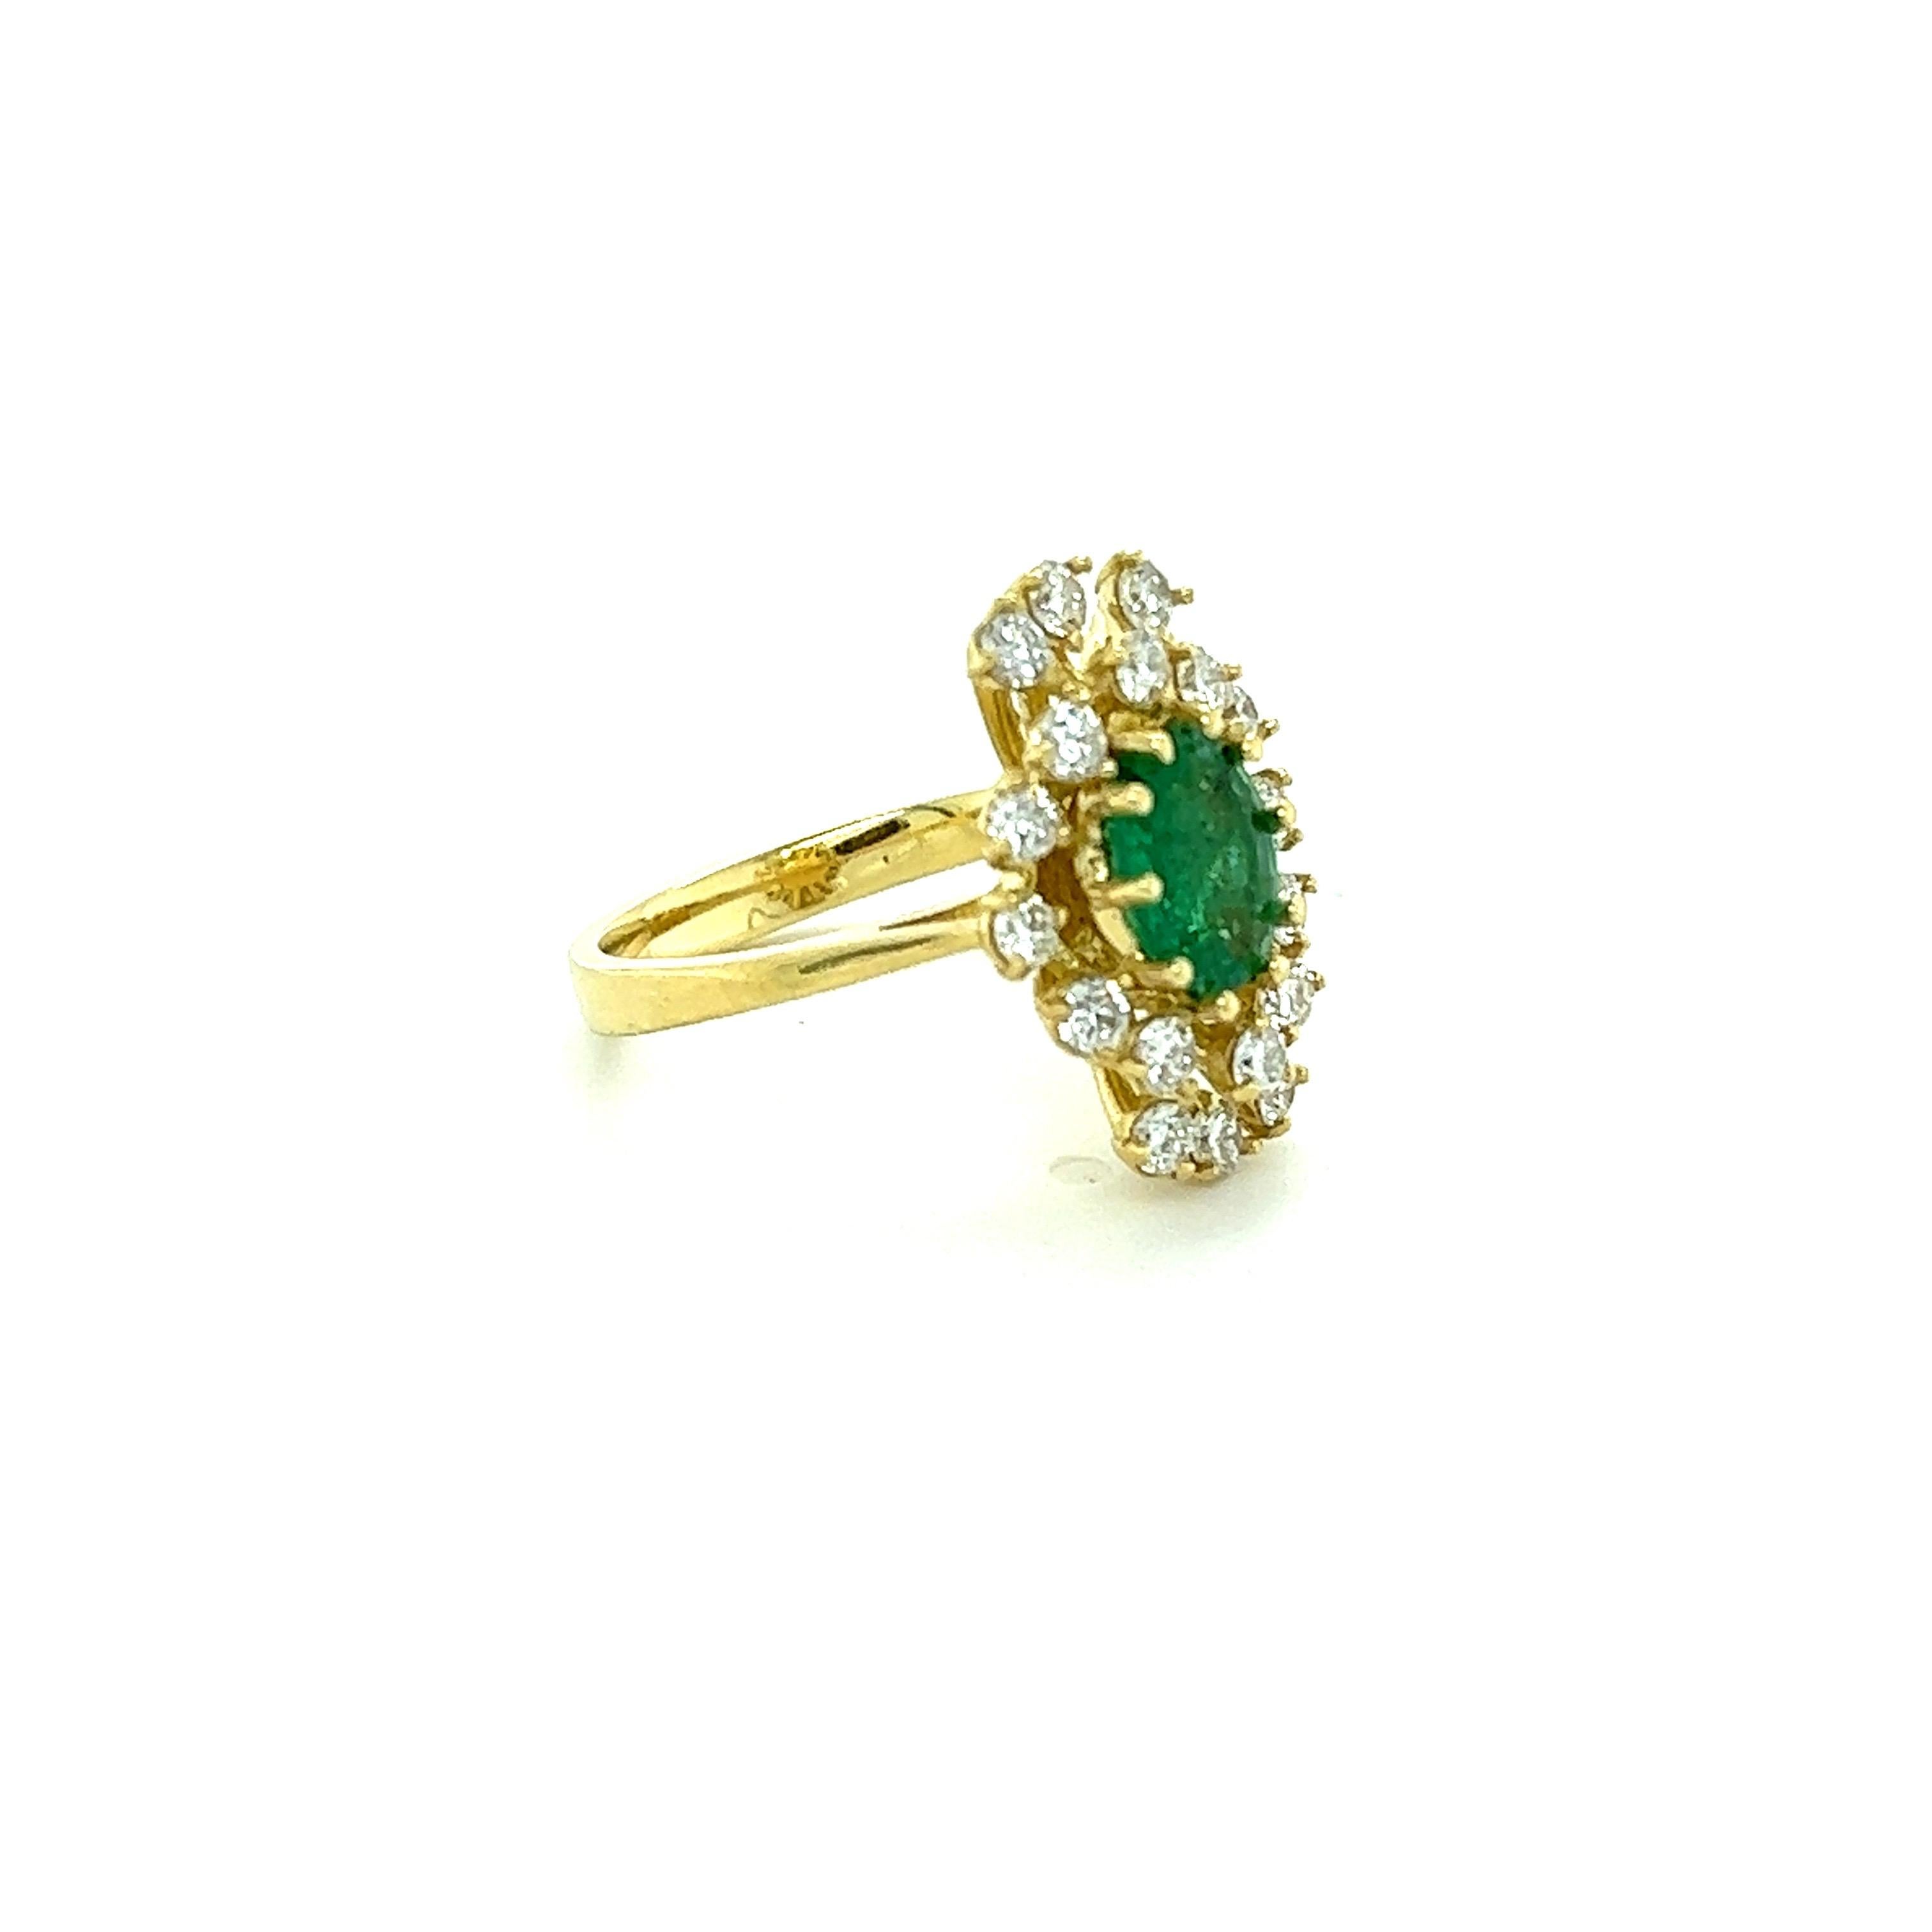 This ring has a 1.03 Carat Oval Cut Emerald and is surrounded by 18 Round Cut Diamonds that weighs 0.84 Carats. (Clarity: SI1, Color: F) The total carat weight of the ring is 1.87 carats. 
The Oval Cut Emerald measures at approximately 8 mm x 6 mm.